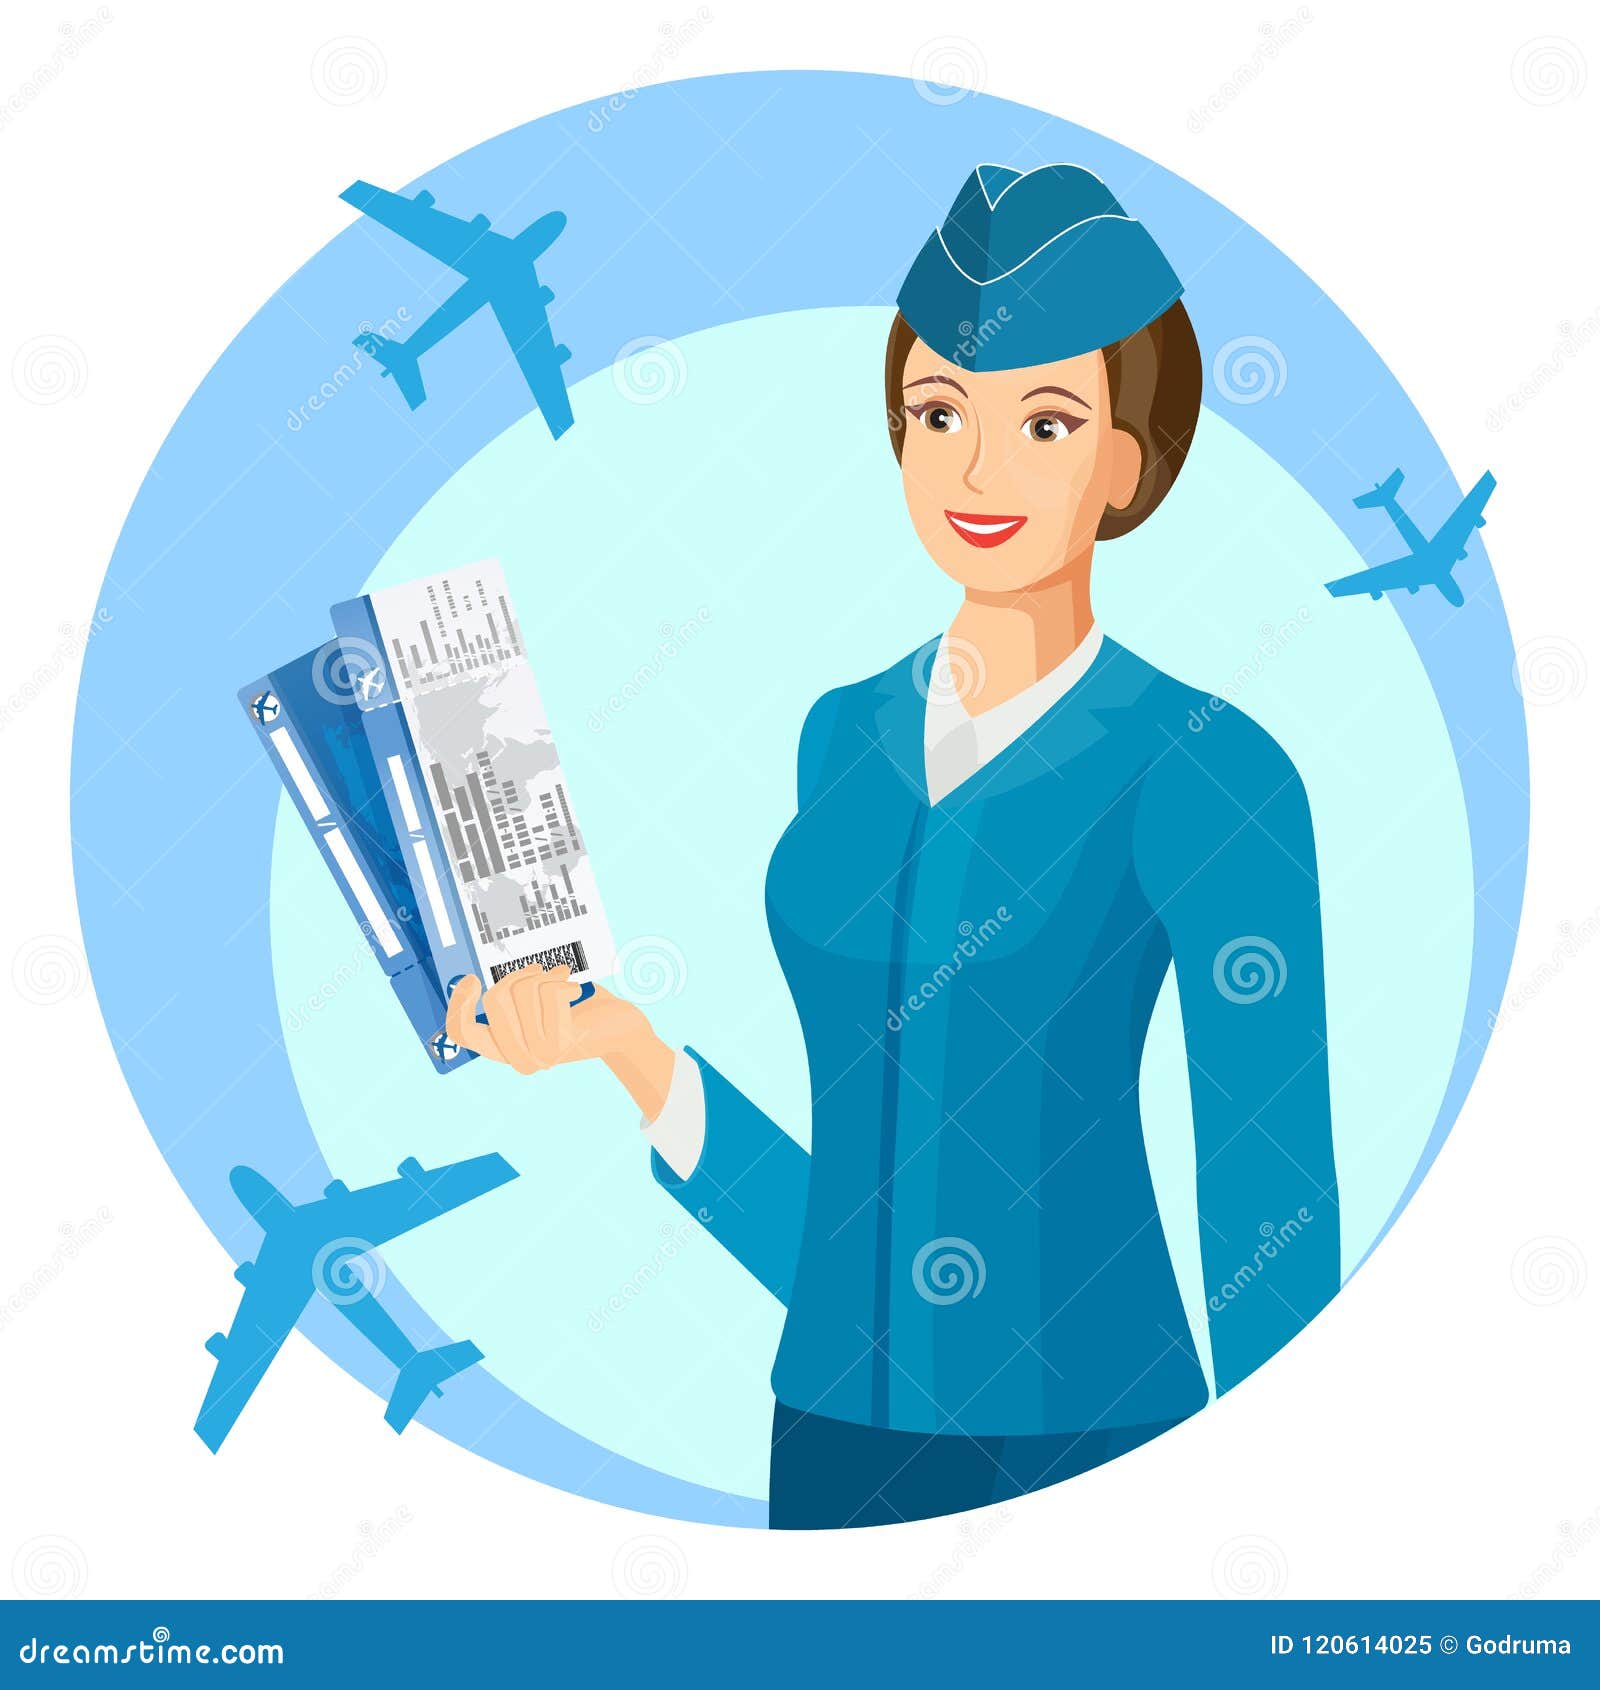 Smiling Stewardess With Air Passage In Hands Promo Poster